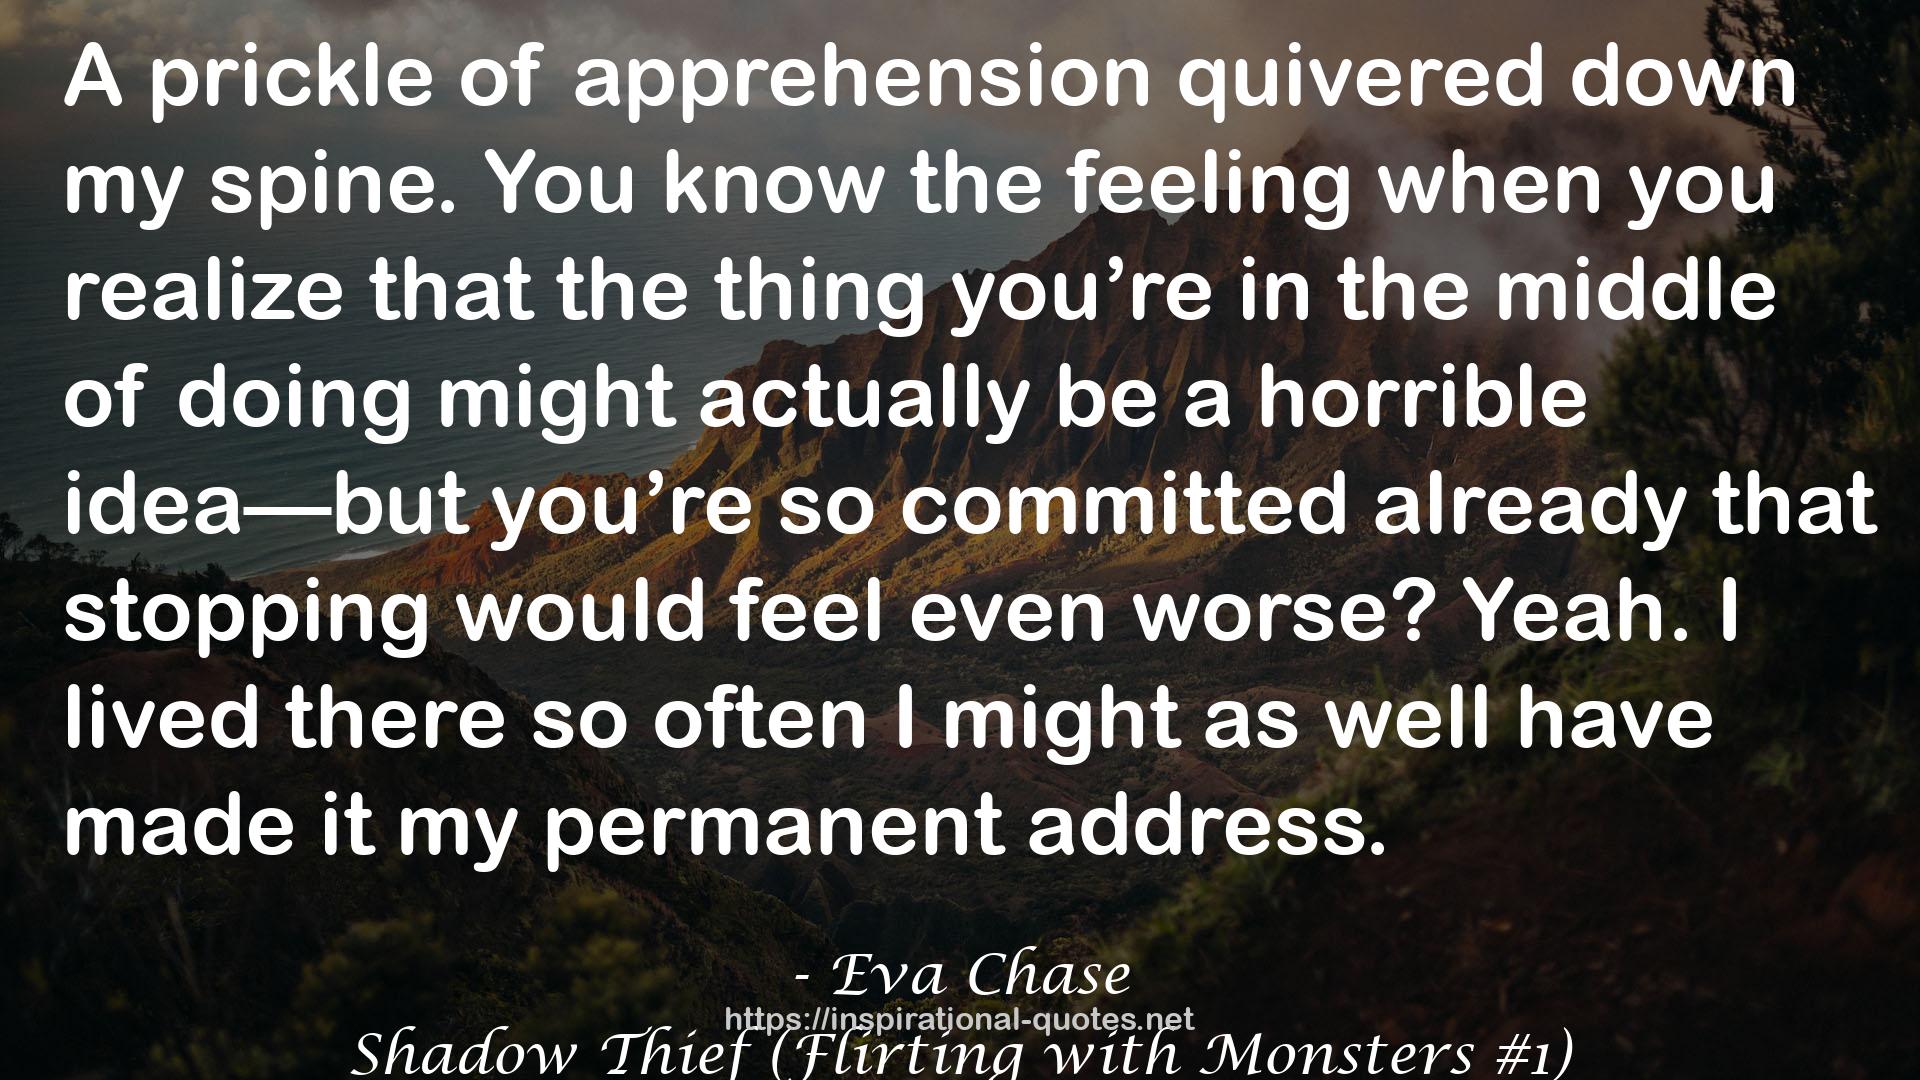 Shadow Thief (Flirting with Monsters #1) QUOTES